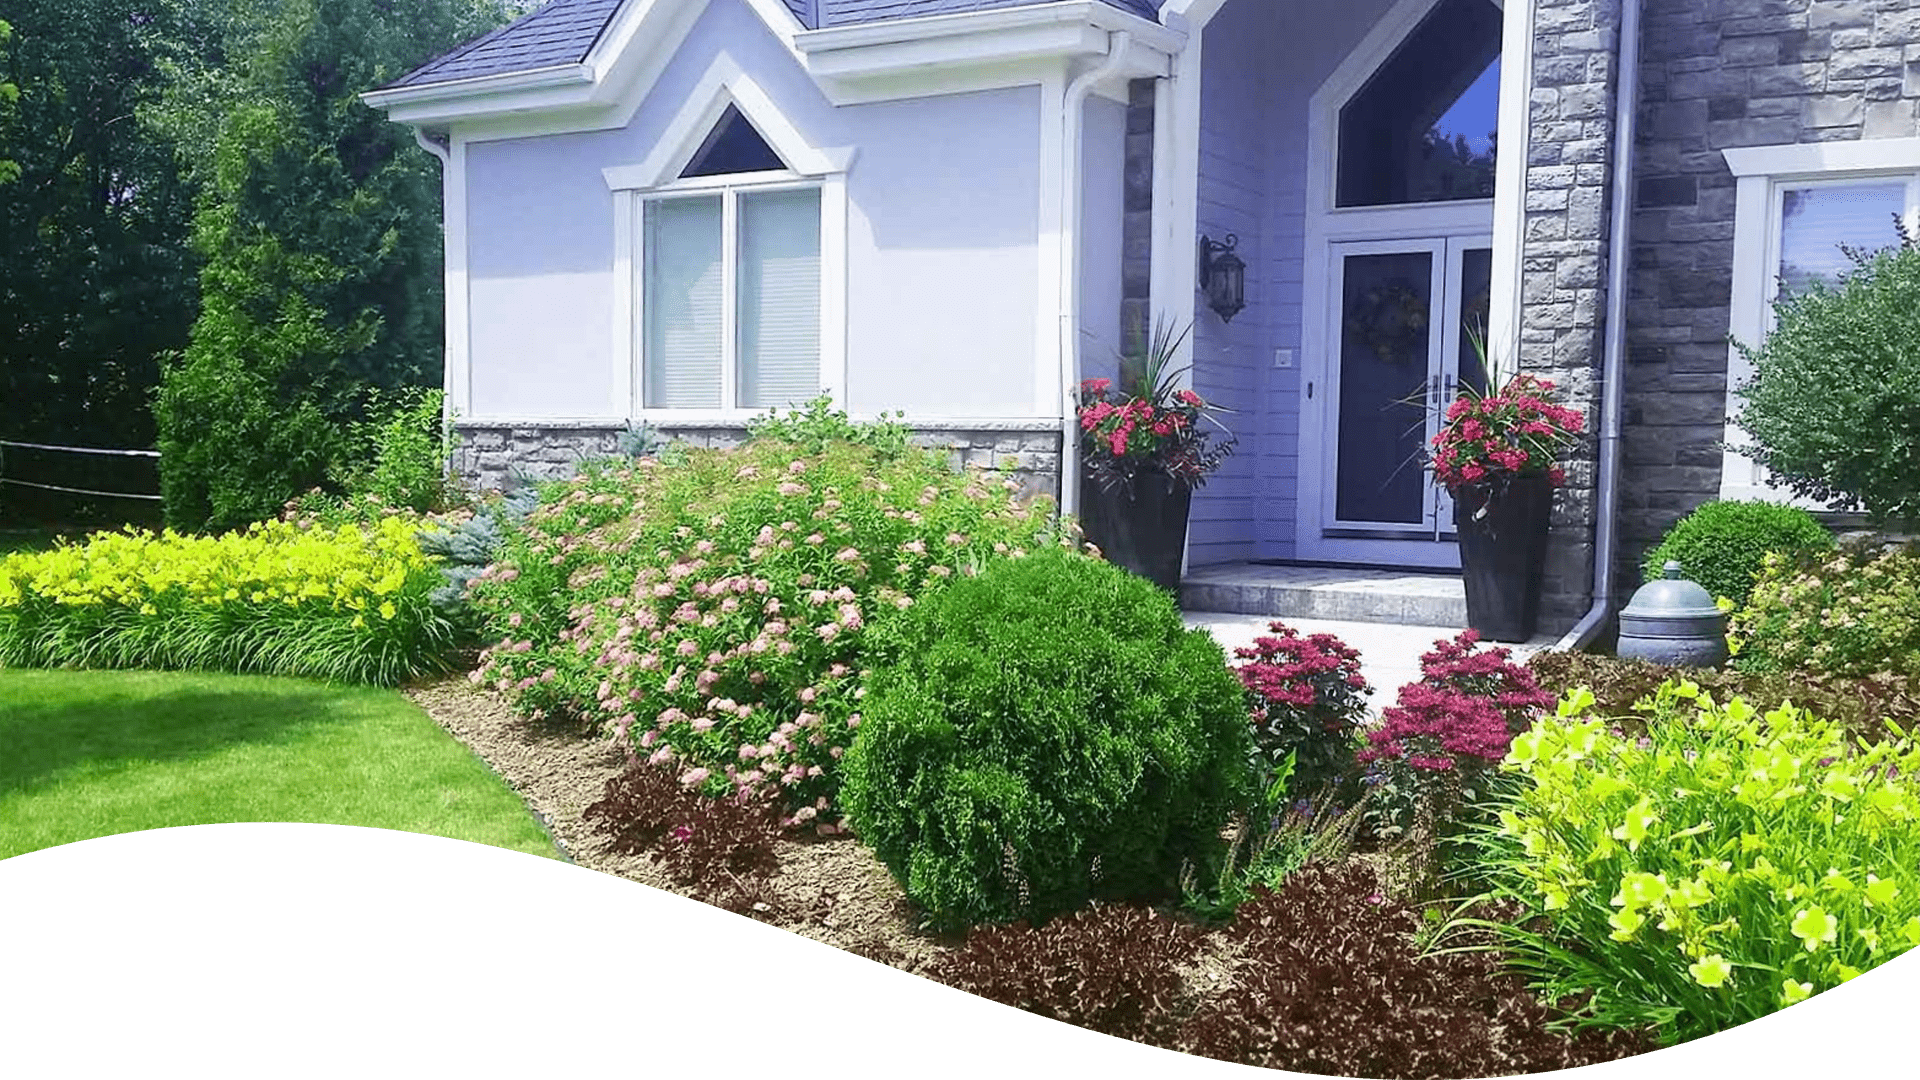 The image shows a well-maintained garden in front of a house with stone accents, colorful flowers, shrubs, and a neatly trimmed lawn.